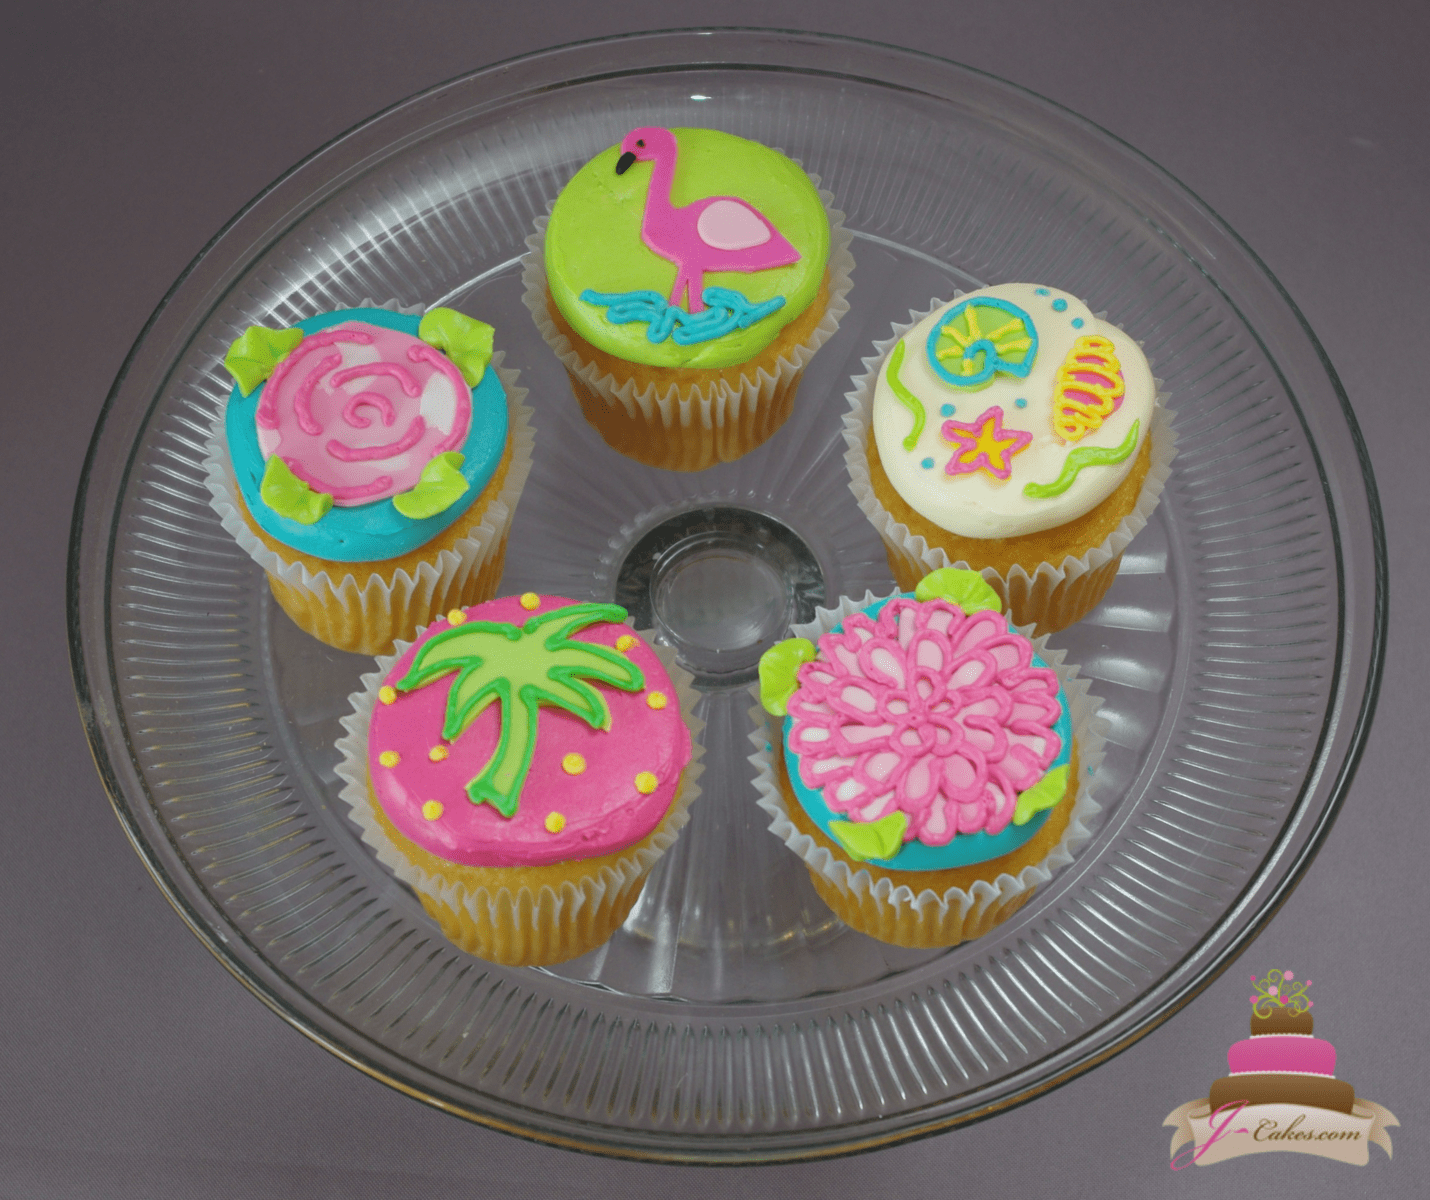 (655) Lily Pulitzer Cupcakes